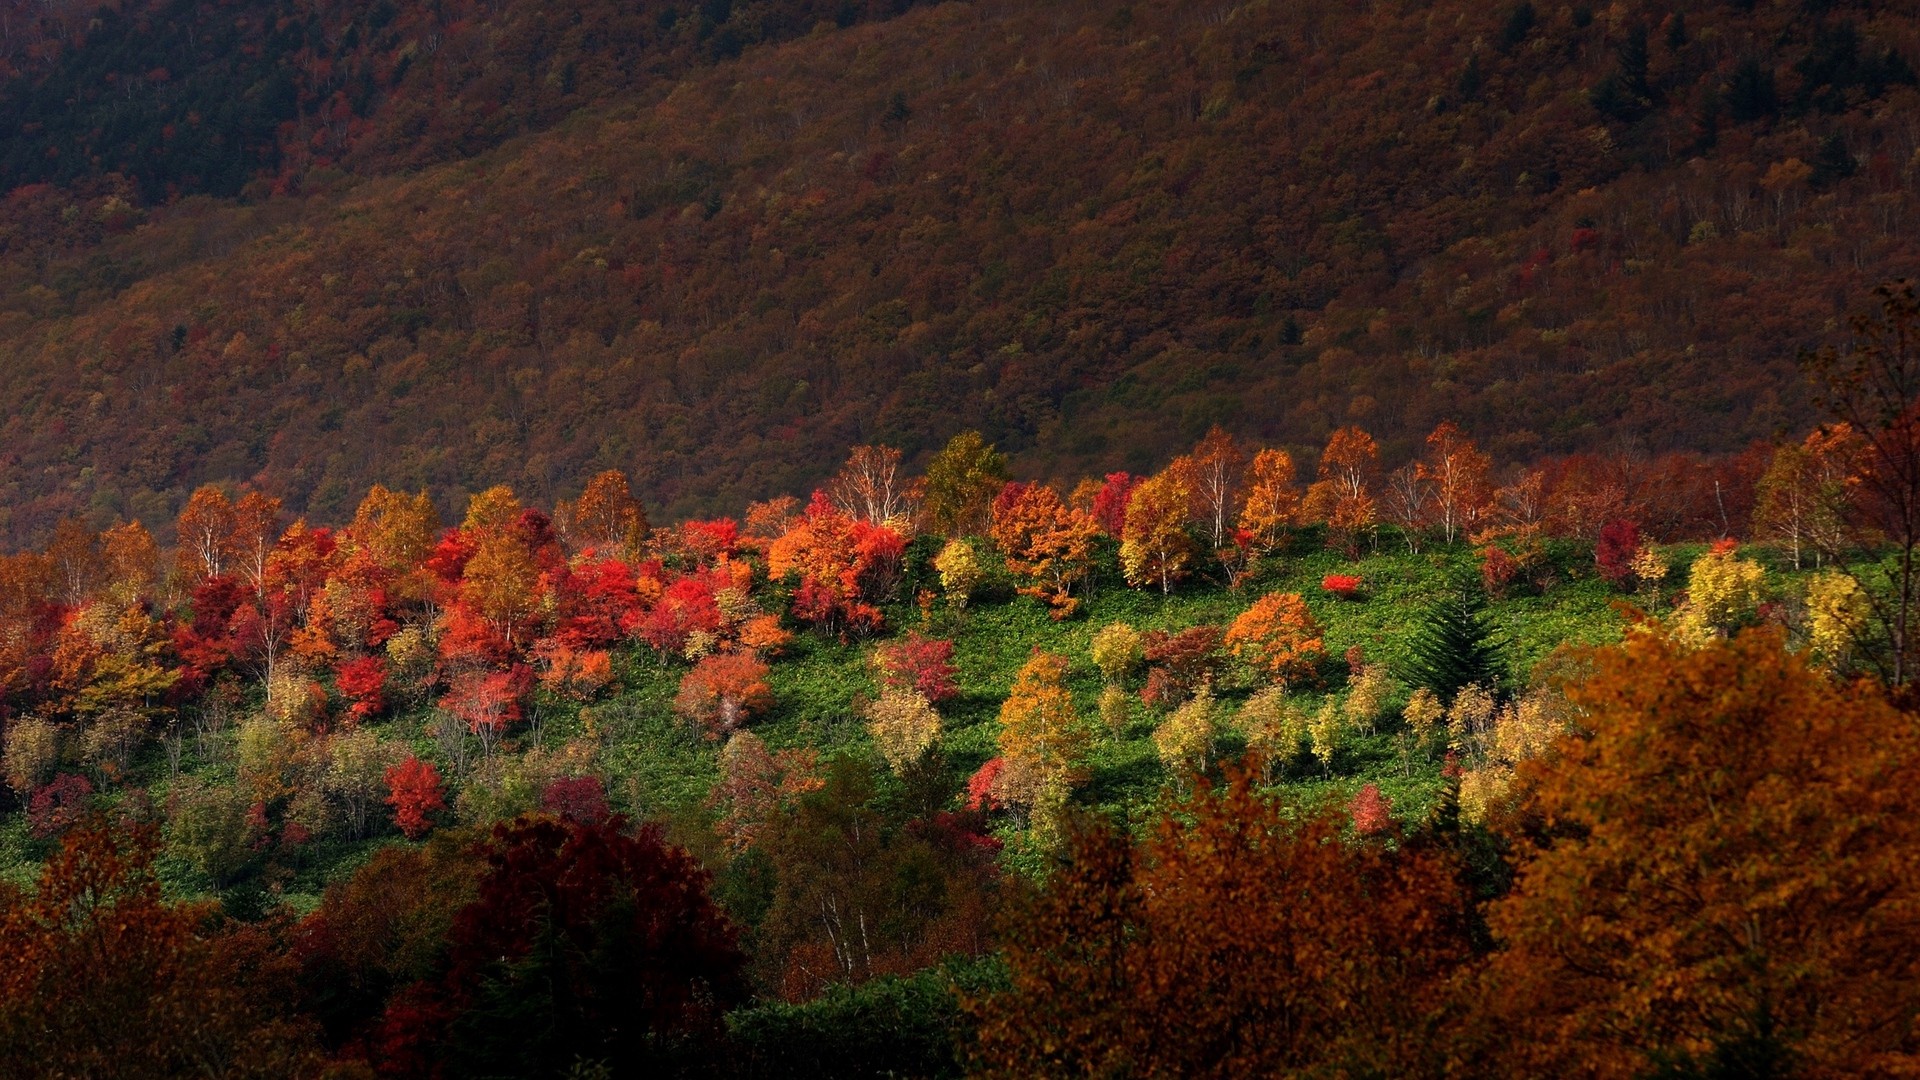 1920x1080 wallpapers: mountains, trees, autumn, grass (image)